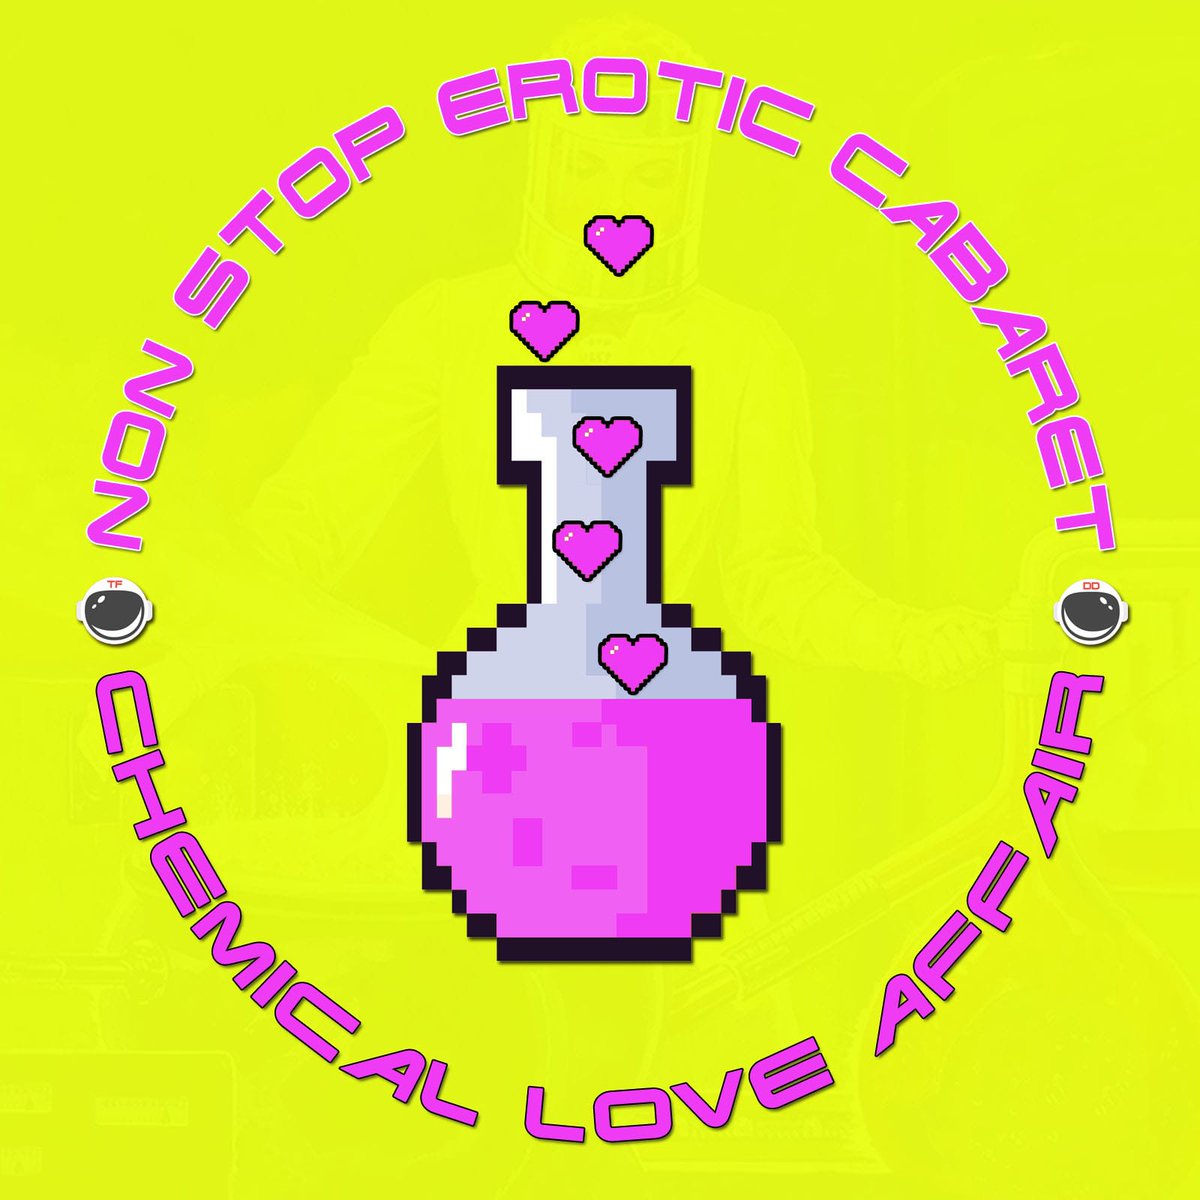 nEW siNGLE cHEMICAL lOVE aFFAIR oUT oN sEPTEMBER 1ST tF mM dD #nSECmuSIC #nEWmUSICfRIDAY #NewMusicDaily #Newmusic #nEWsiNGLE #sYNTHpOP #synth #Lovesong #cHEMICALlOVE @aRTISTrTWEETERS #rOCKINfAVES @rTaRTbOOST #sYNTHWAVE #SpotifyRT #rtItBot distrokid.com/hyperfollow/no…